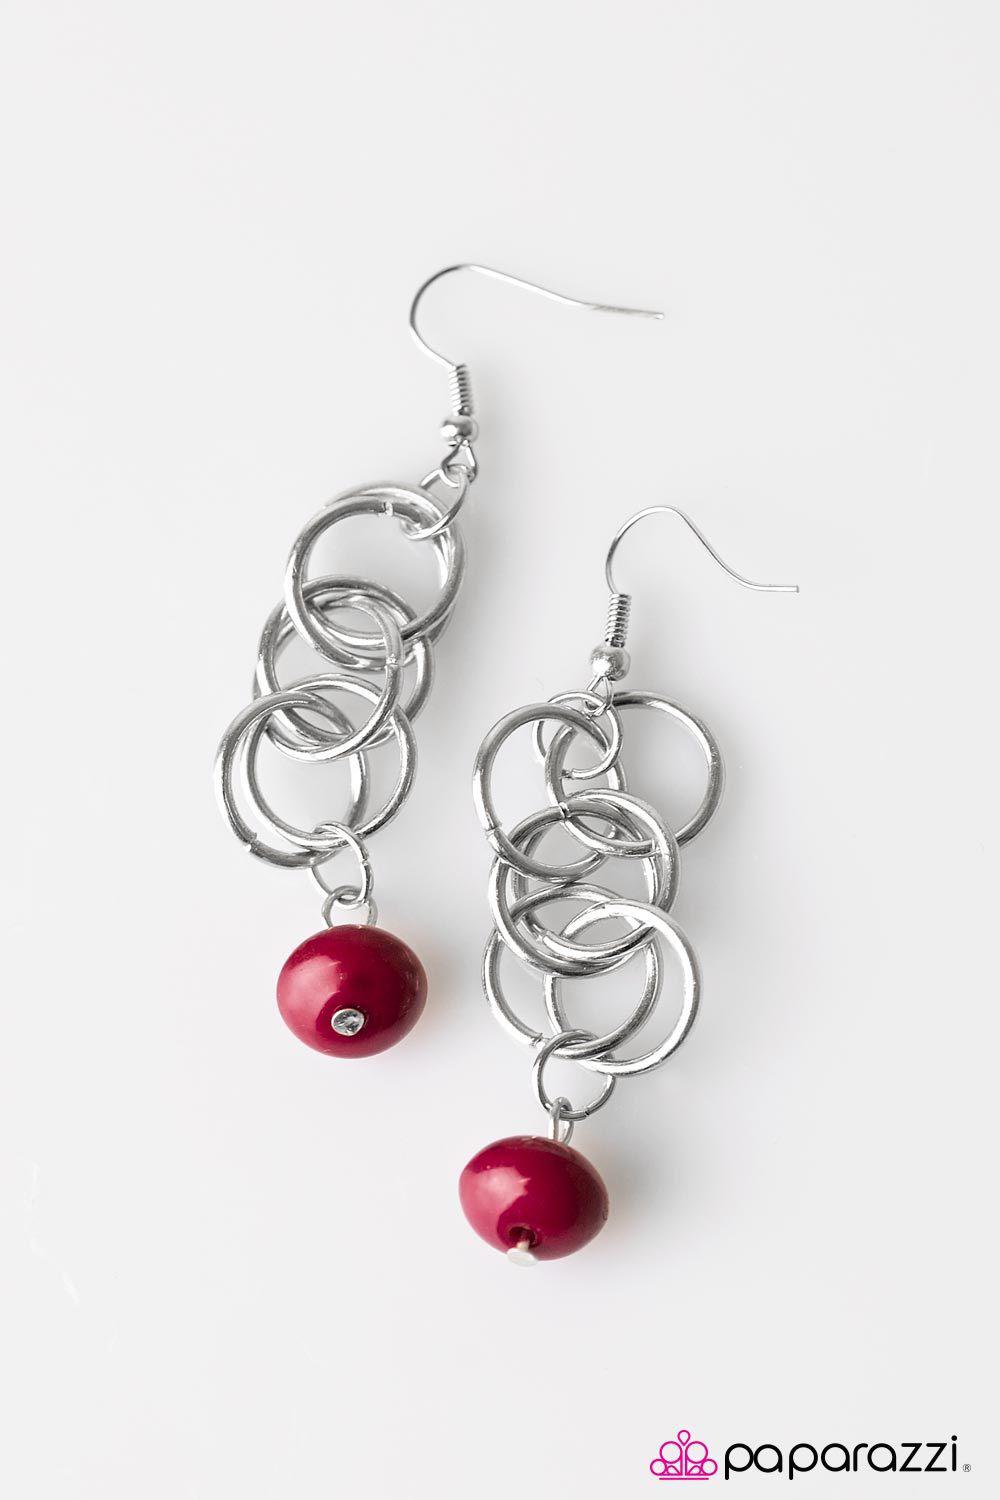 Marvelously Marvelous Pink and Silver Earrings - Paparazzi Accessories-CarasShop.com - $5 Jewelry by Cara Jewels